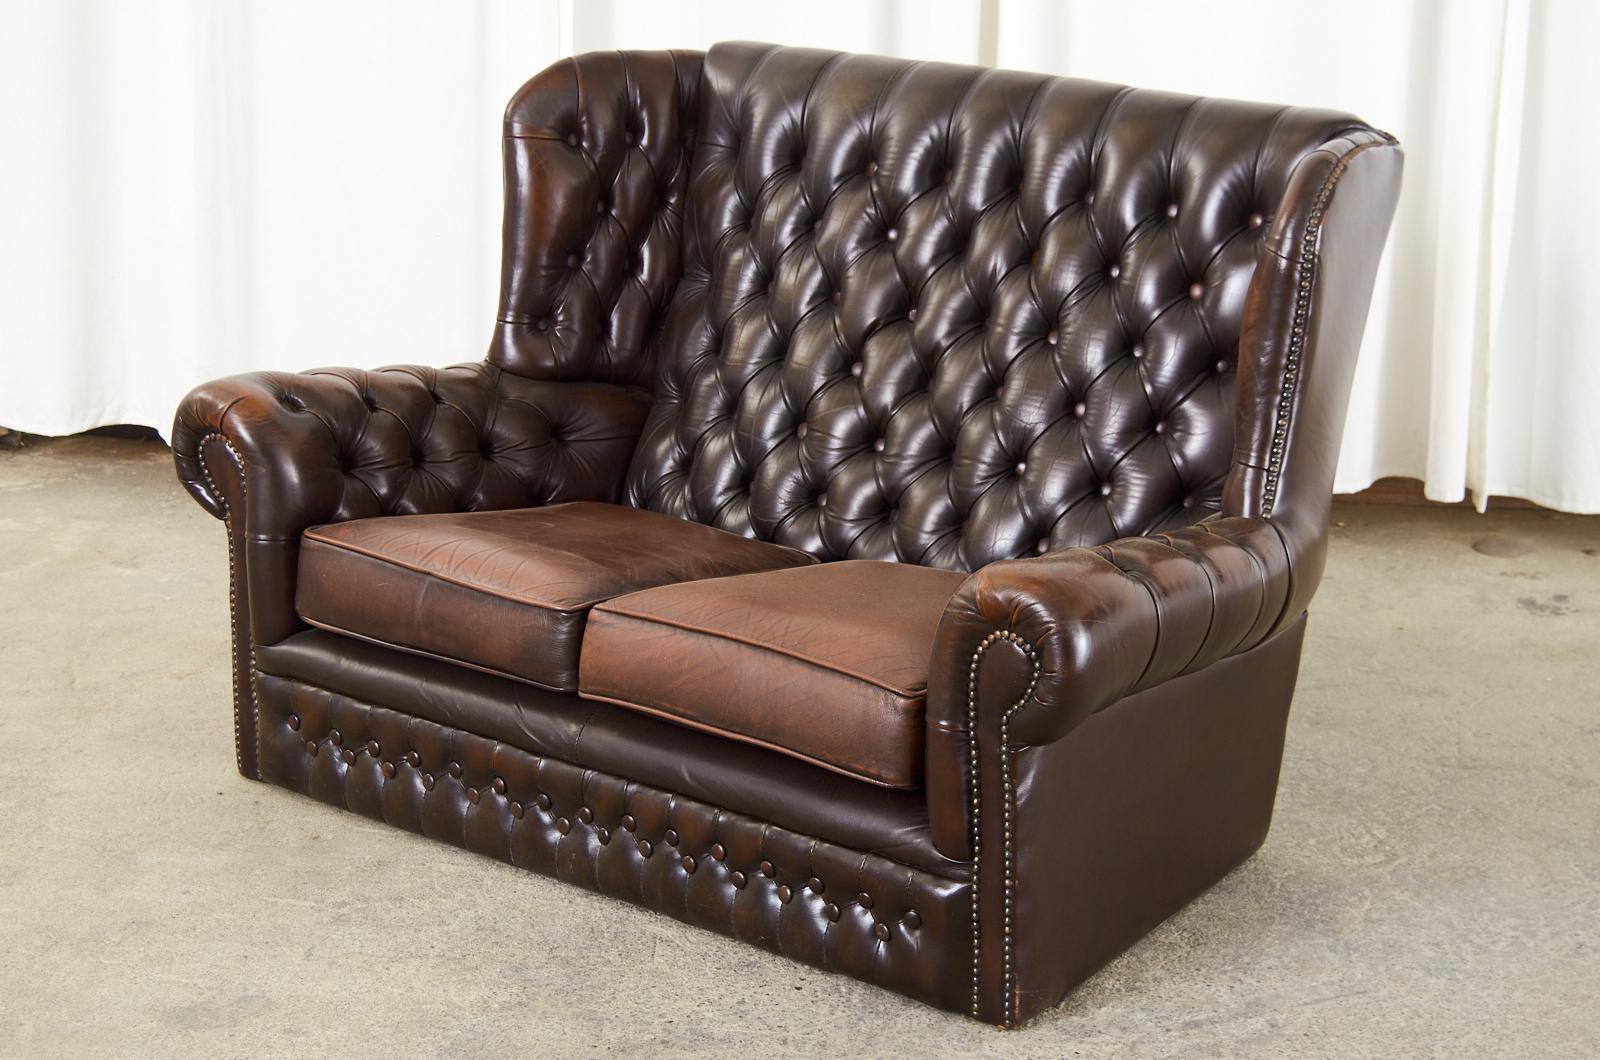 Gorgeous English wingback chesterfield settee sofa featuring a cigar leather tufted upholstery hand-crafted in England by Thomas Lloyd from a hard frame covered with fine Italian full top grain leather hides. Beautifully aged and worn with a soft